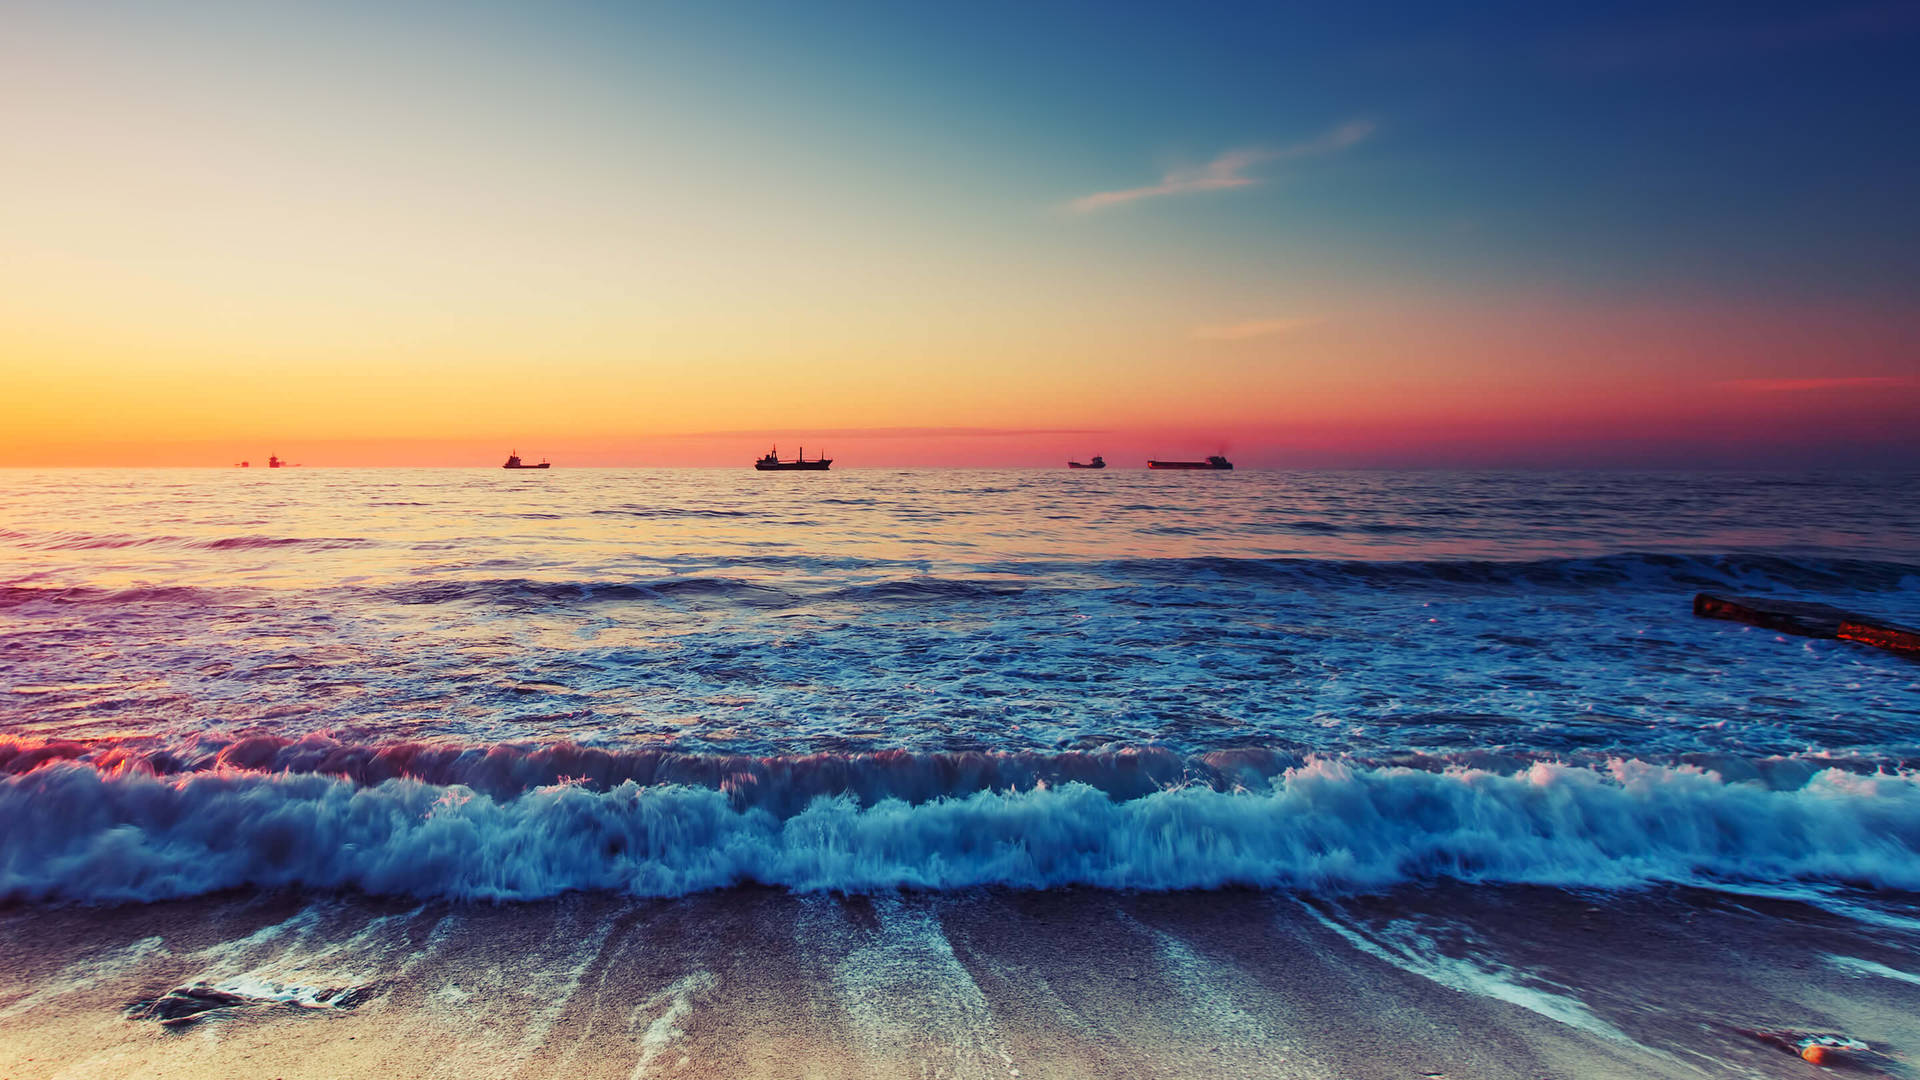 Beautiful Beach With Ships In The Distance Wallpaper